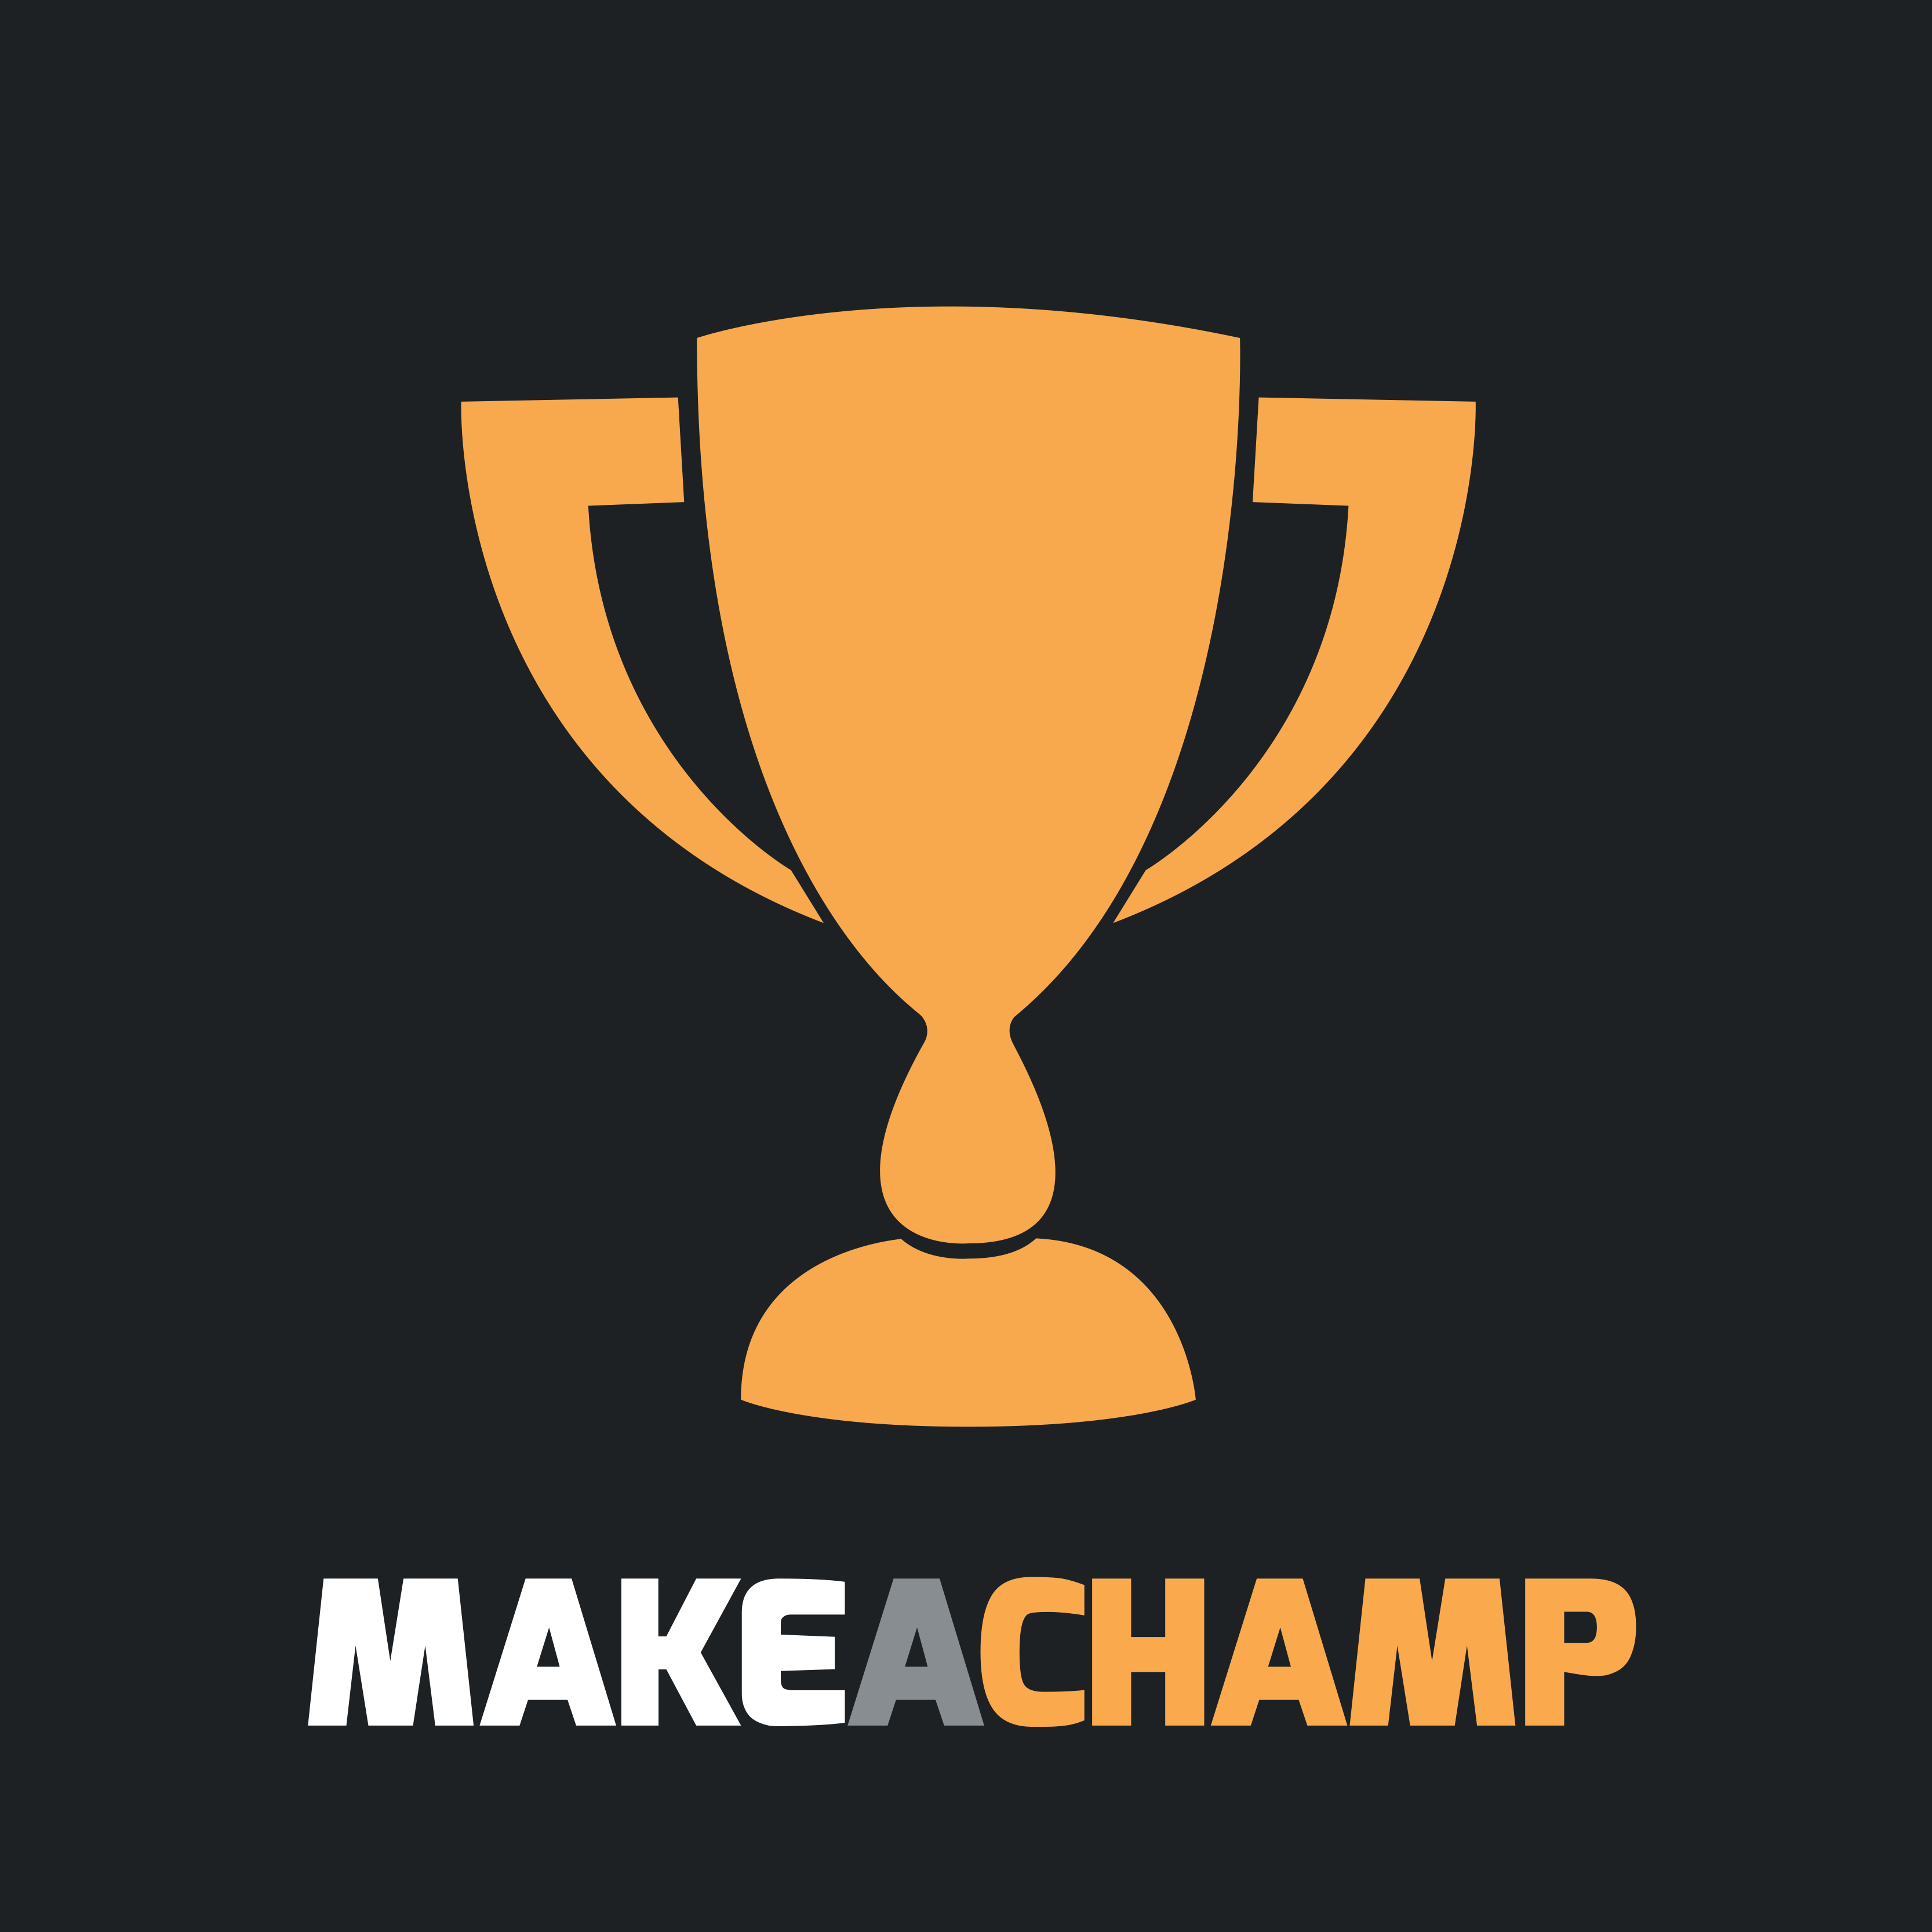 Helped over 400 triathletes like you get crowdfunded in 2014. Fund your next @worldtriathlon, IronMan & other races with MAKEACHAMP!   Tweets by @ancorjudo